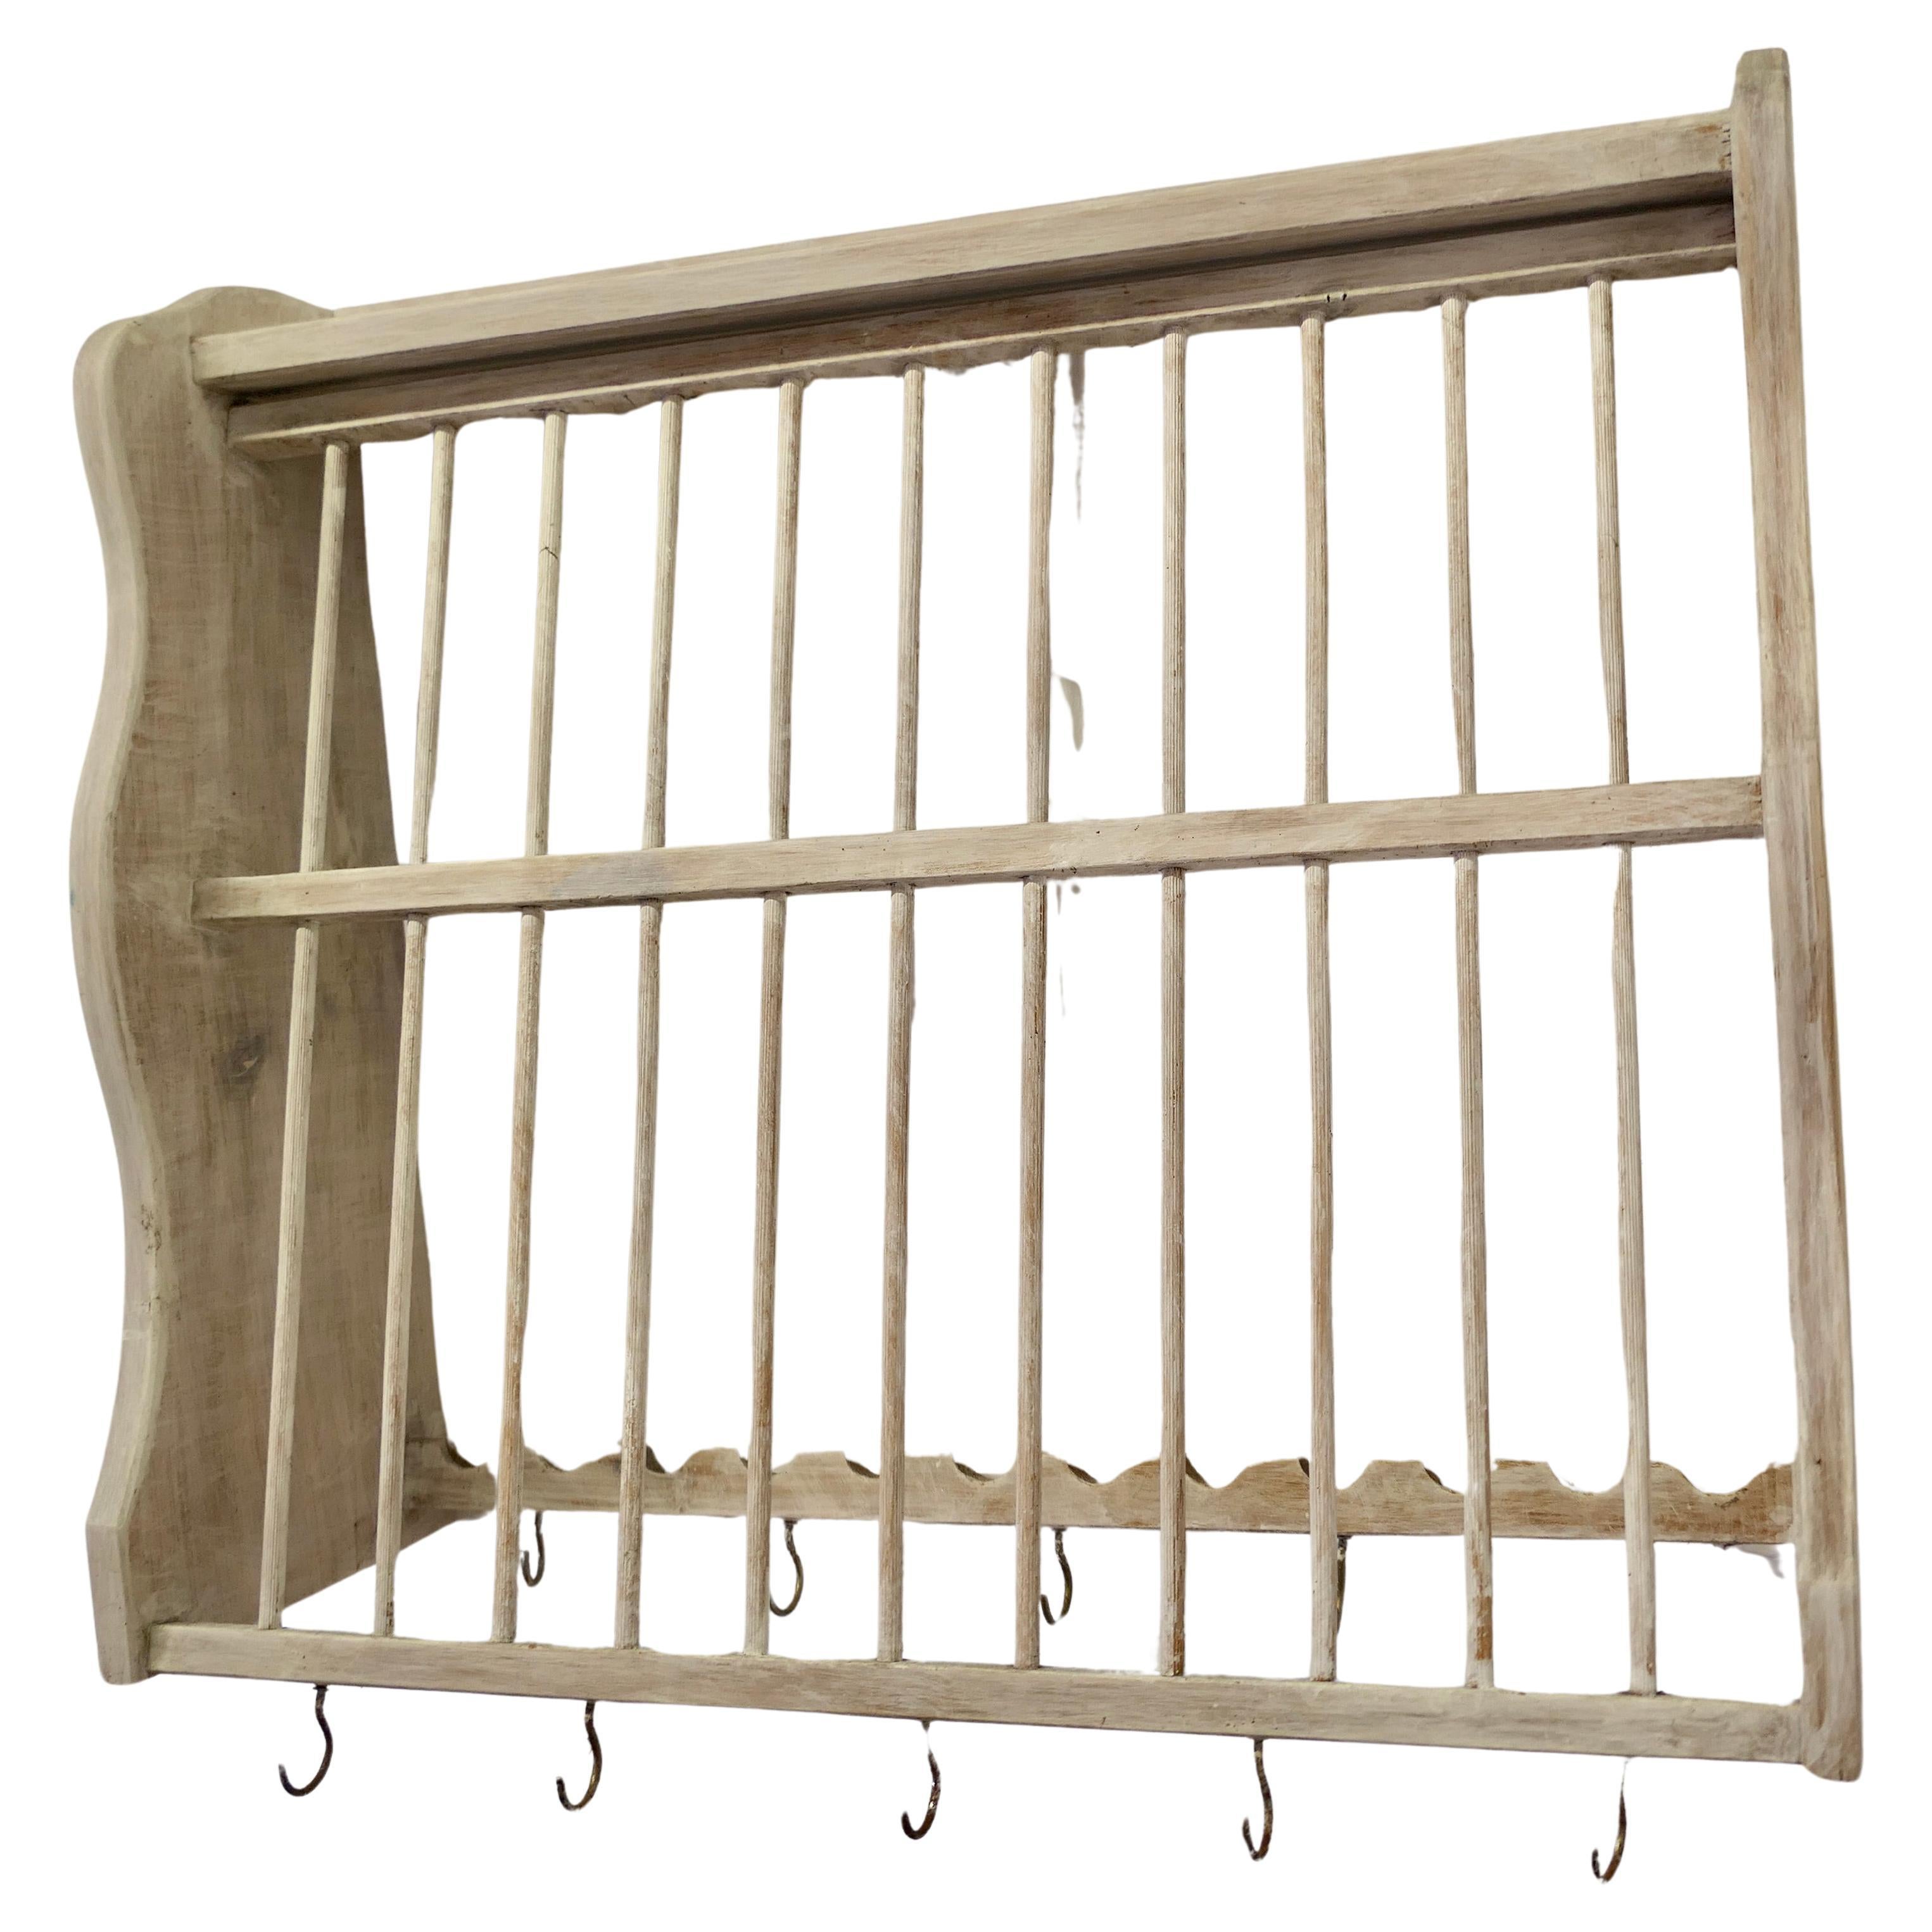 French Farmhouse Pine Plate Rack

This useful piece hangs on the wall and drains and stores plates until required
It is made from pine and allows 2 rows of plates to be stored at any one time, it has 2 rows of cup hooks along the bottom, it has as